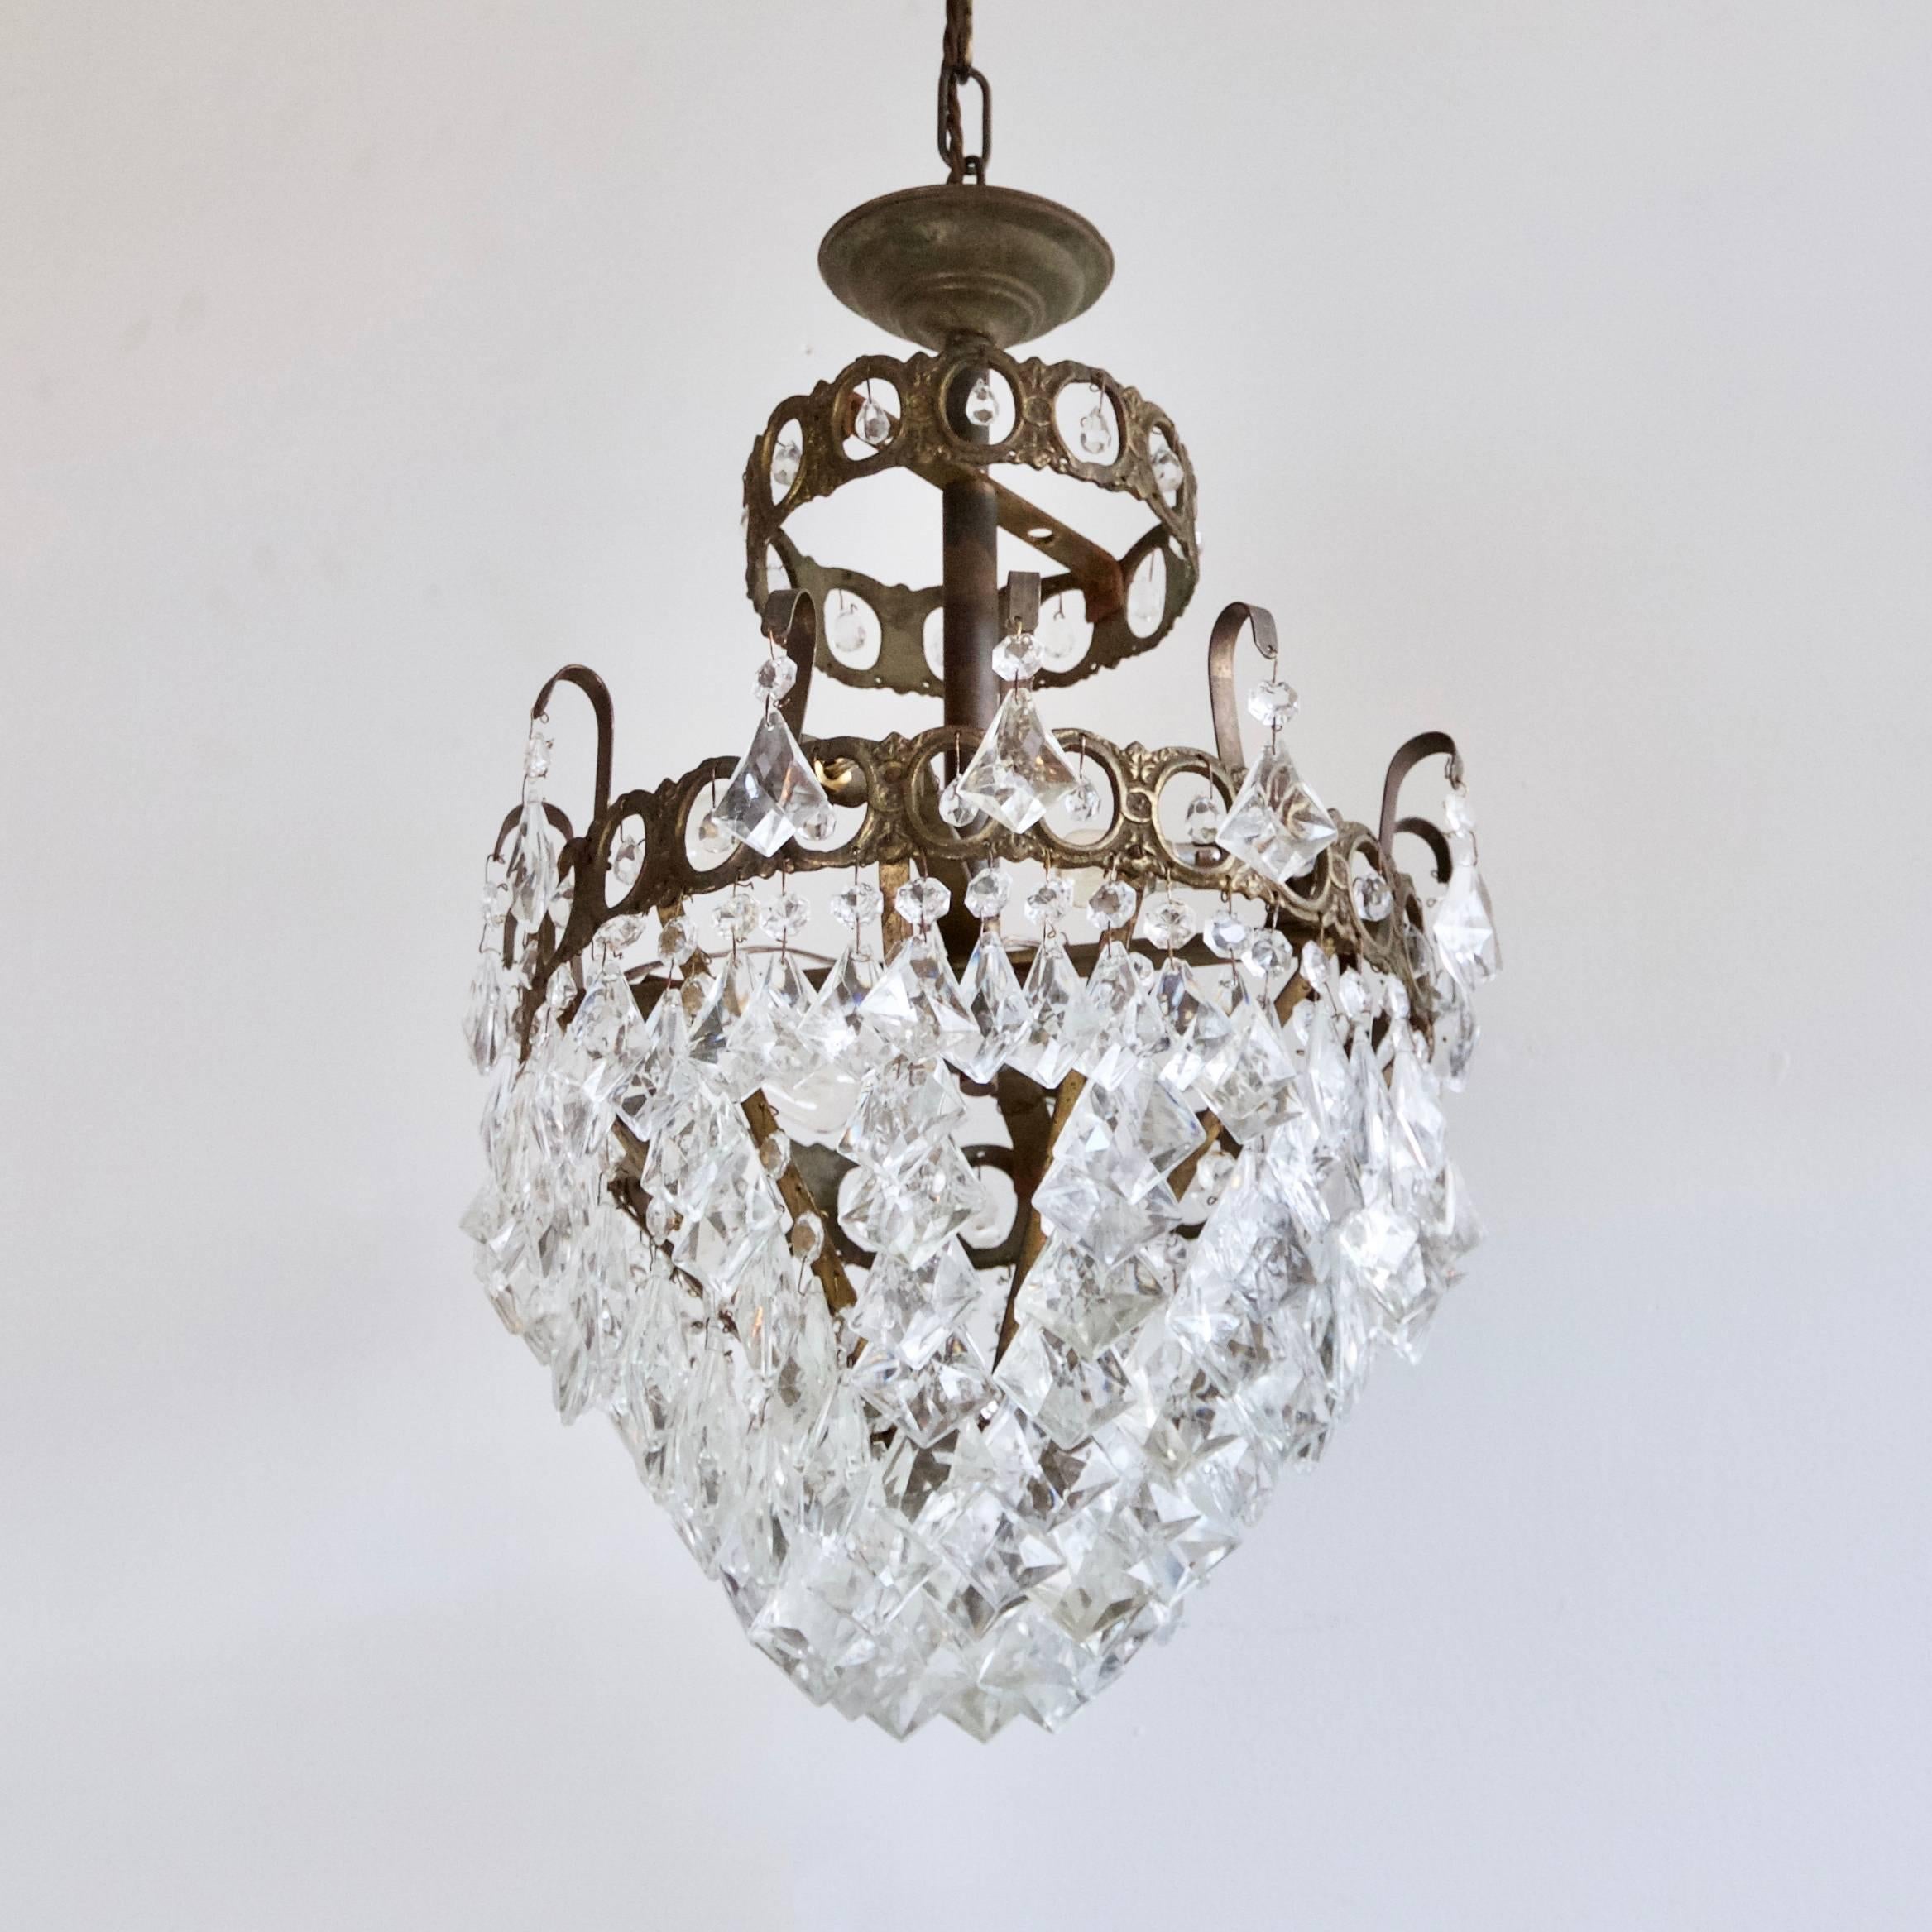 Petite French, 1920s brass chandelier dressed in glass kite drops and small contemporary crystal details. Chandelier uses four SBC, B15 fittings. Supplied with chain and ceiling rose.